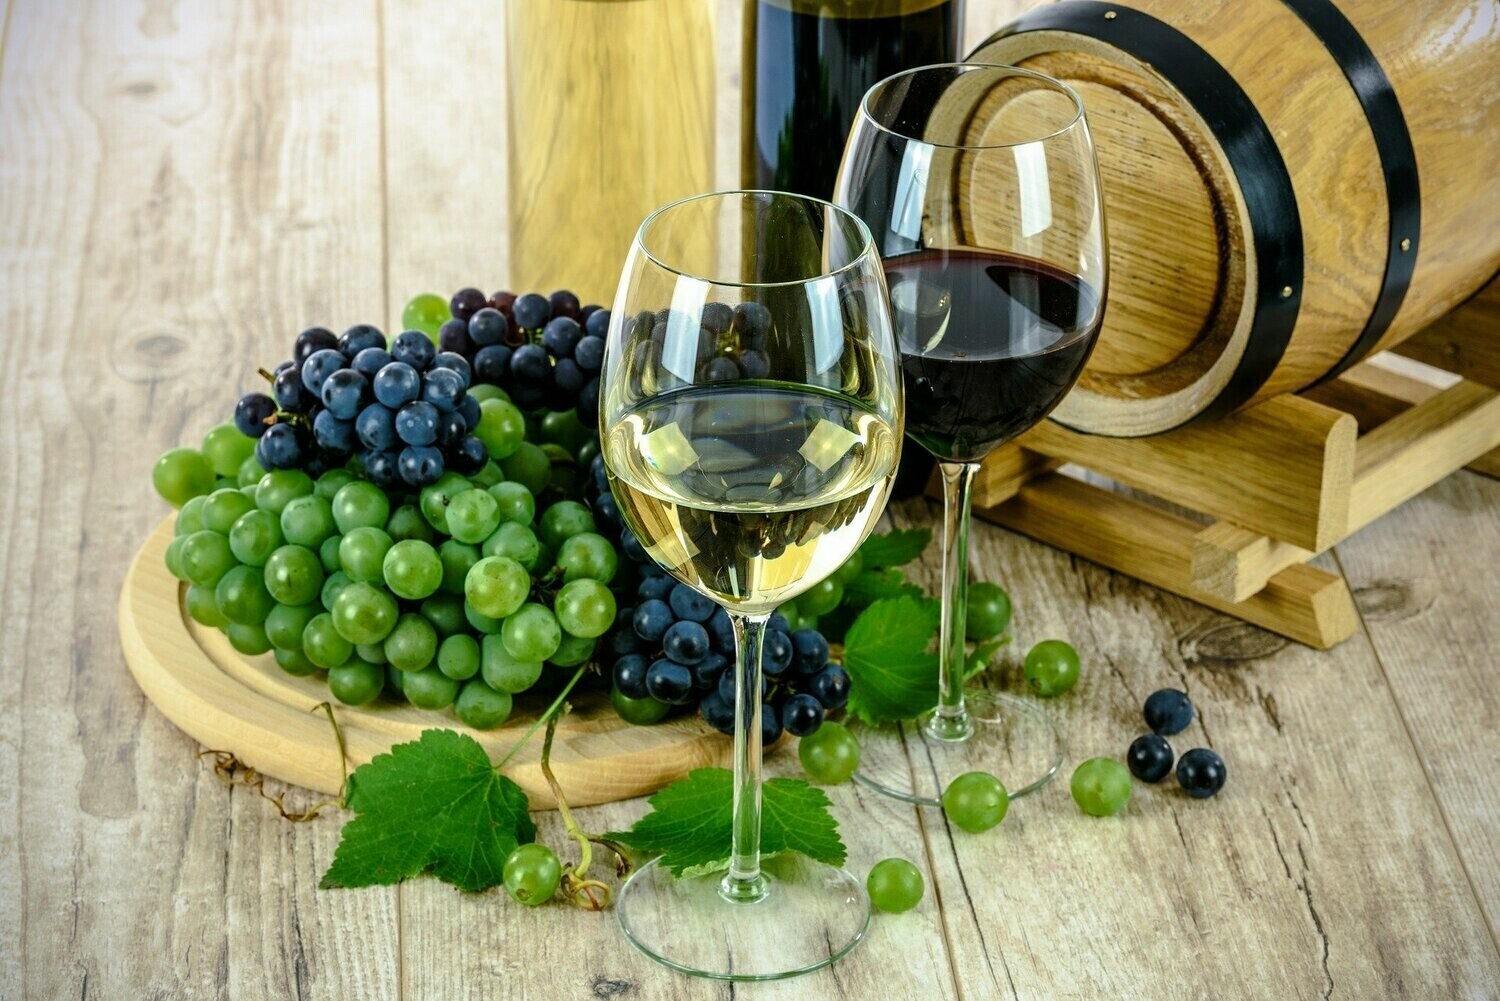 Wine and Grapes - Specially ordered for you. Delivery is approximately 4 - 6 weeks.